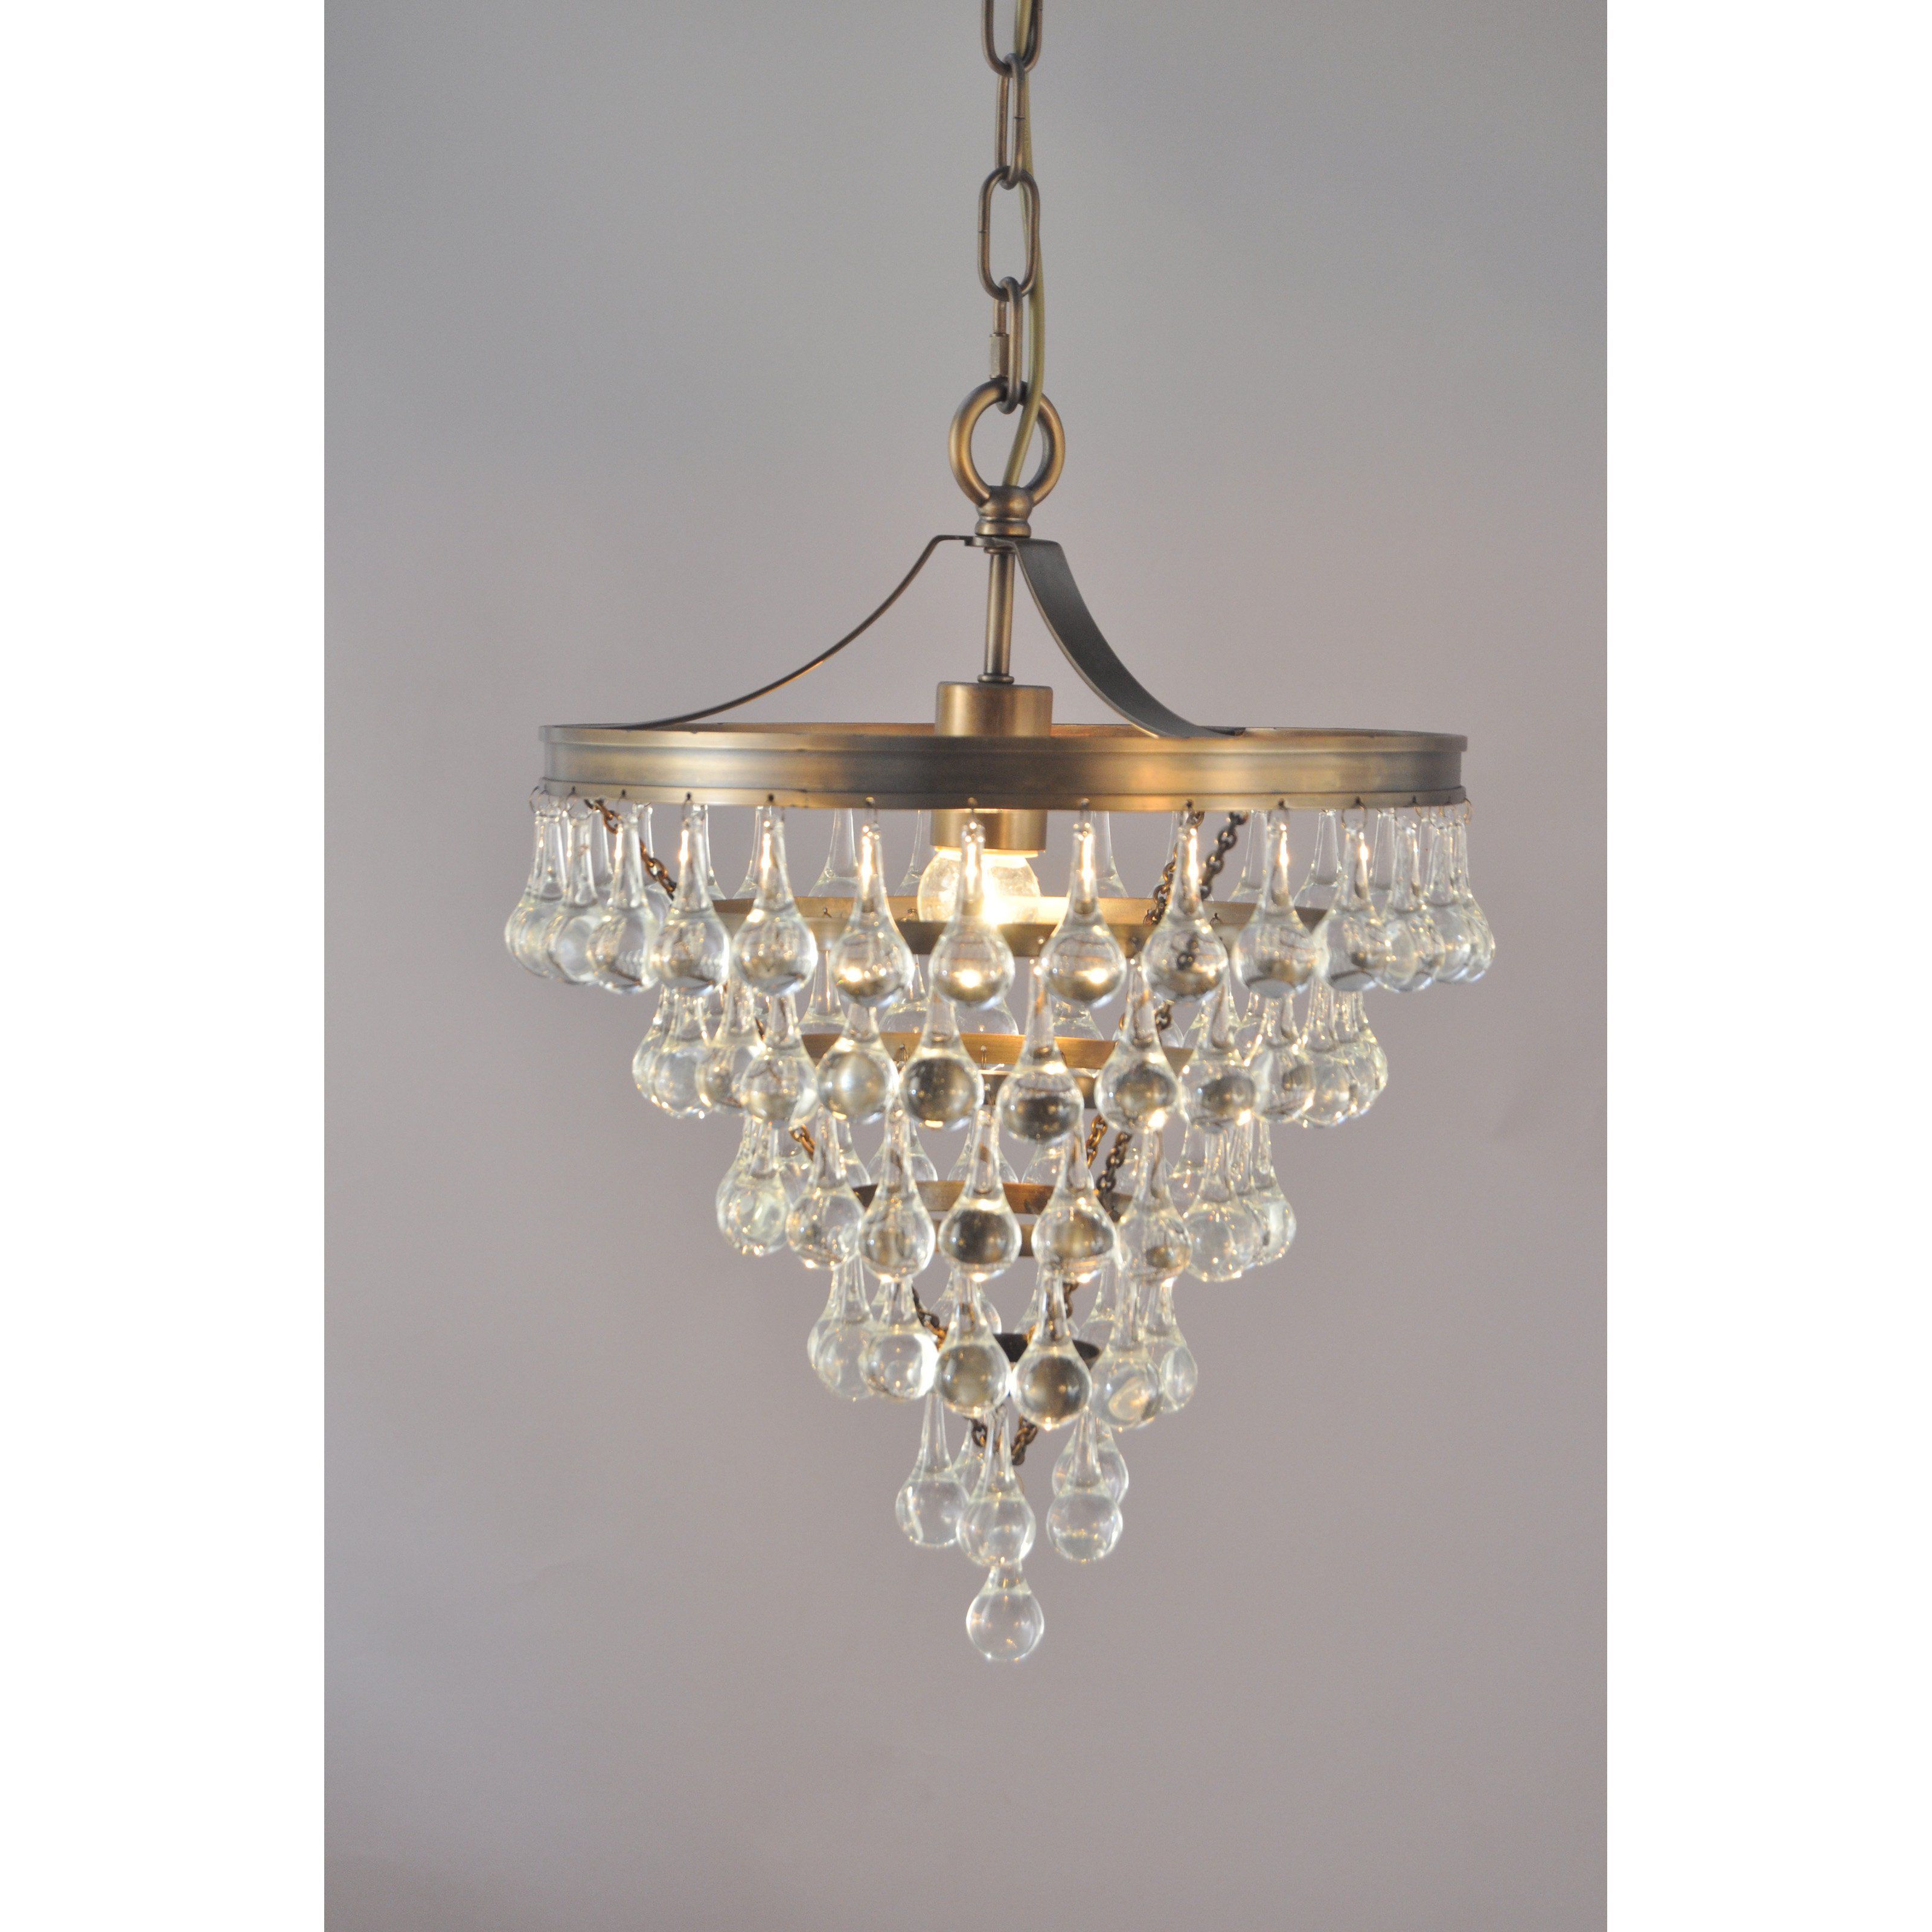 Abbyson Living Henson Claudia Sh Md2137 1anb Tear Drop 6 Intended For Blanchette 5 Light Candle Style Chandeliers (View 27 of 30)